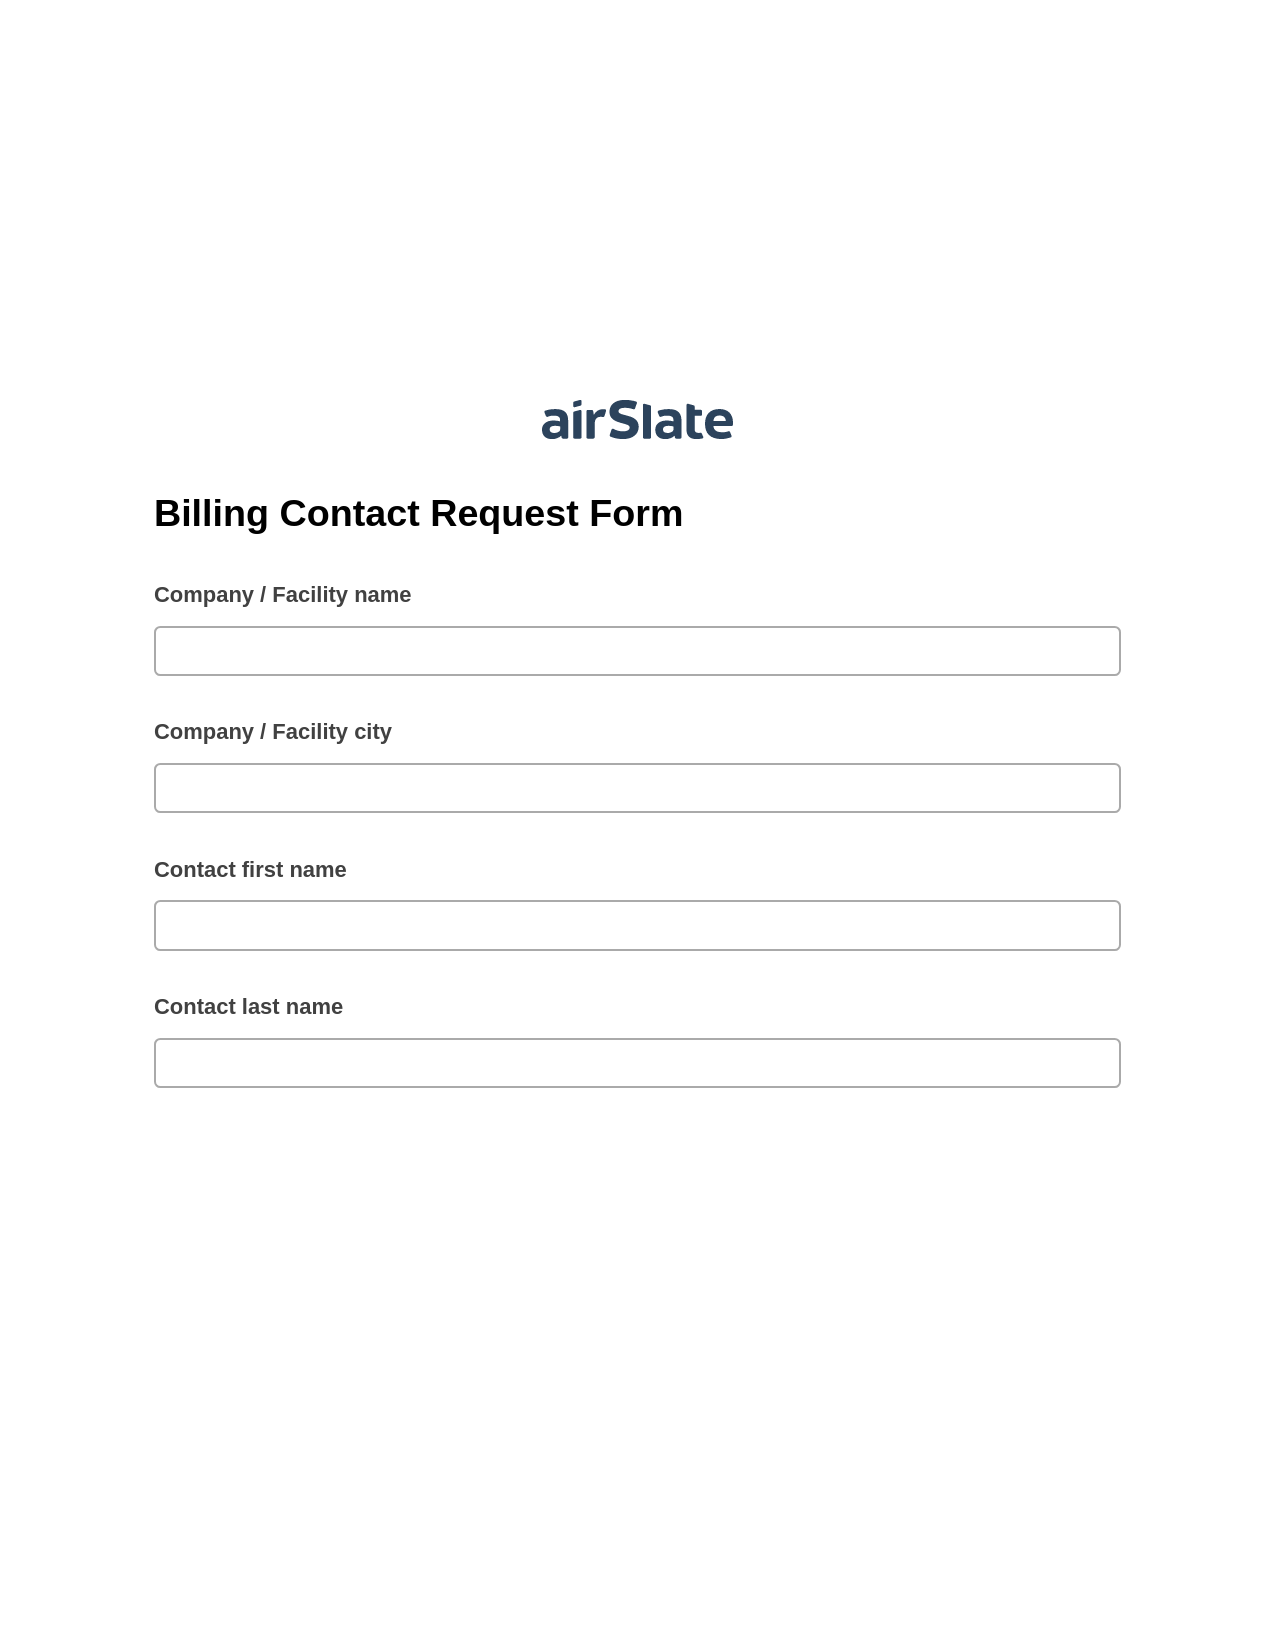 Multirole Billing Contact Request Form Pre-fill from Salesforce Record Bot, Roles Reminder Bot, Export to Salesforce Bot